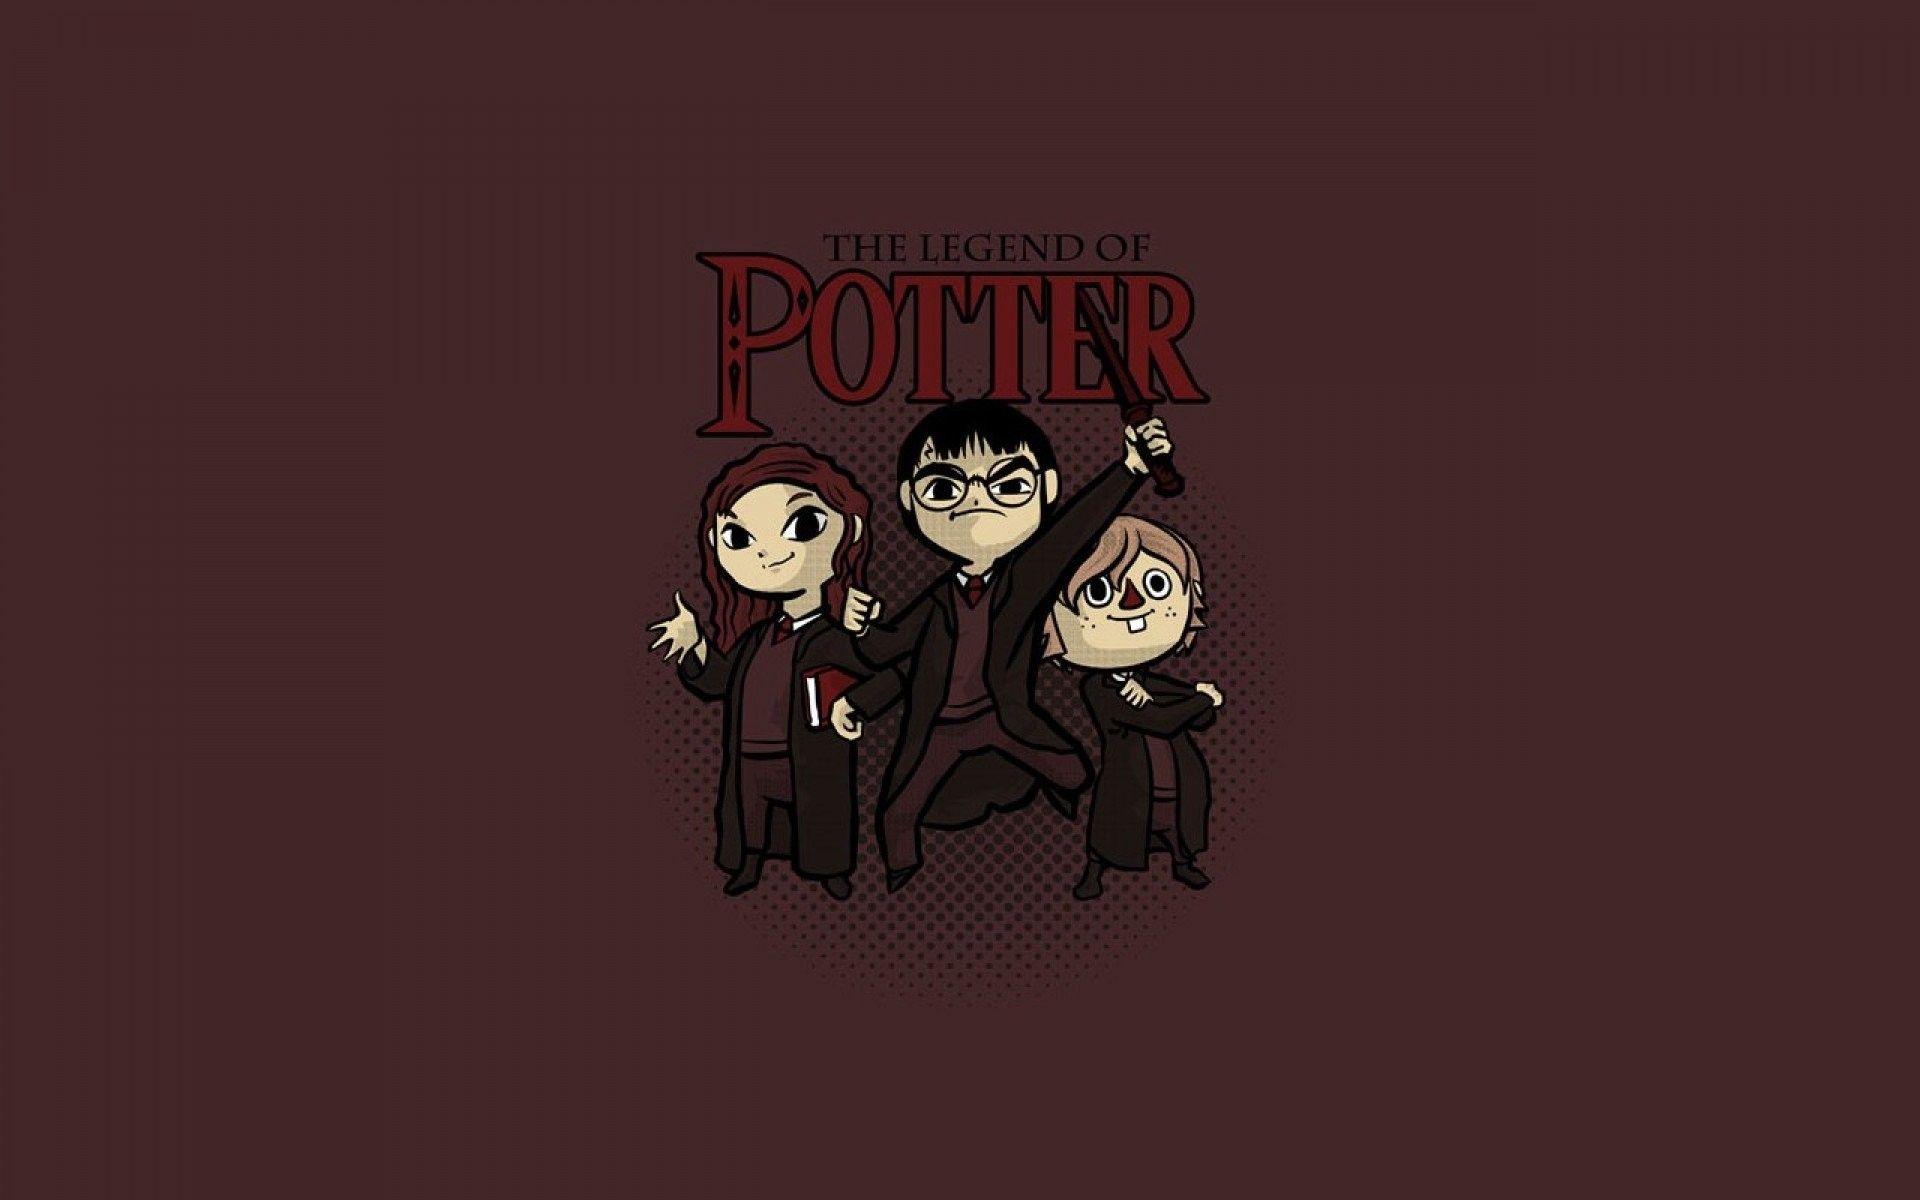 Harry Potter Wallpapers Wallpaper Cave